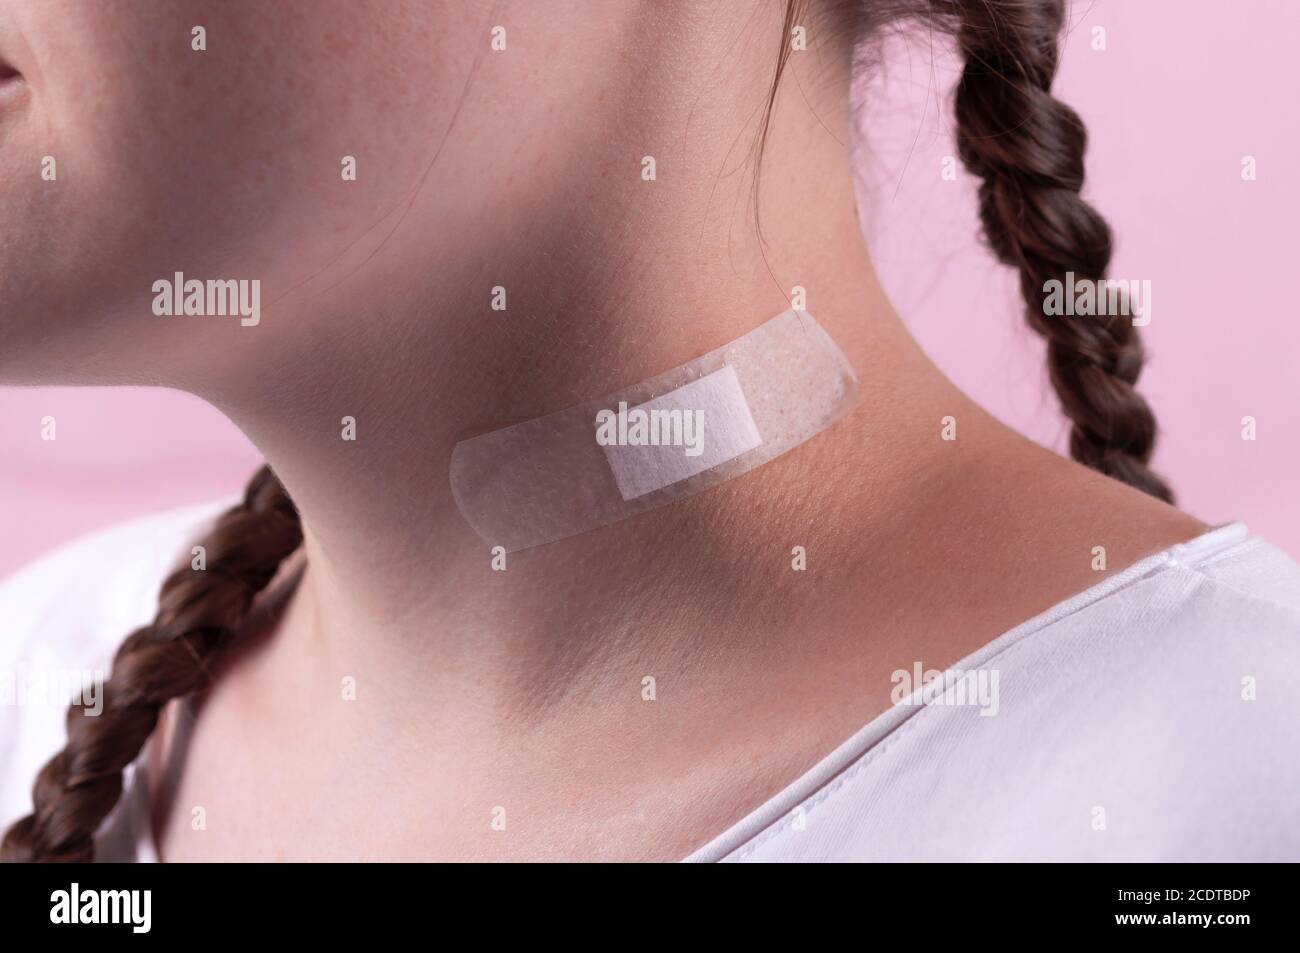 Injury on the neck sealed with a plaster. Providing medical care. The wound was sealed with a plaster. Medical plaster. The girl has a neck injury. Th Stock Photo